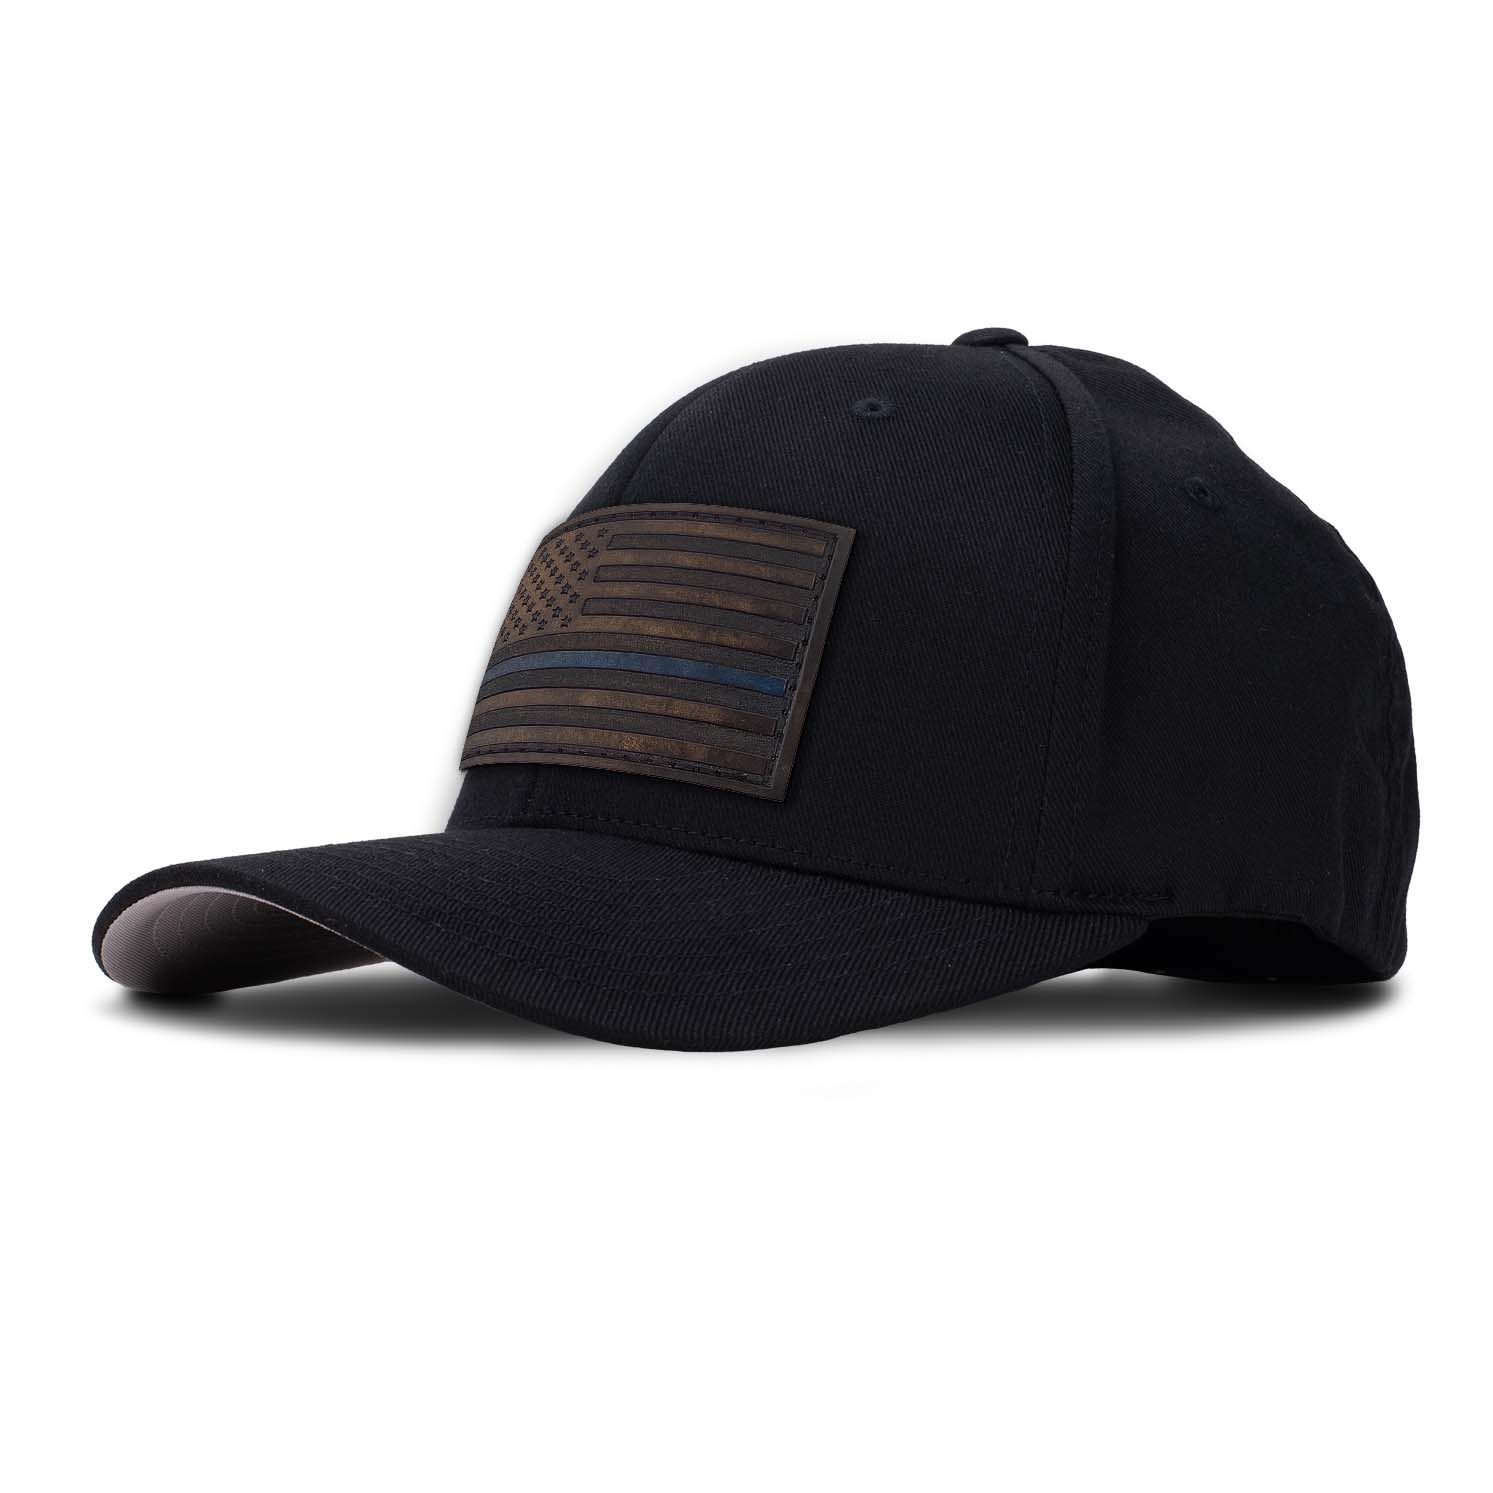 Revolution Mfg all black curved bill  FlexFit hat featuring our Thin Blue Line American Flag full grain leather patch.